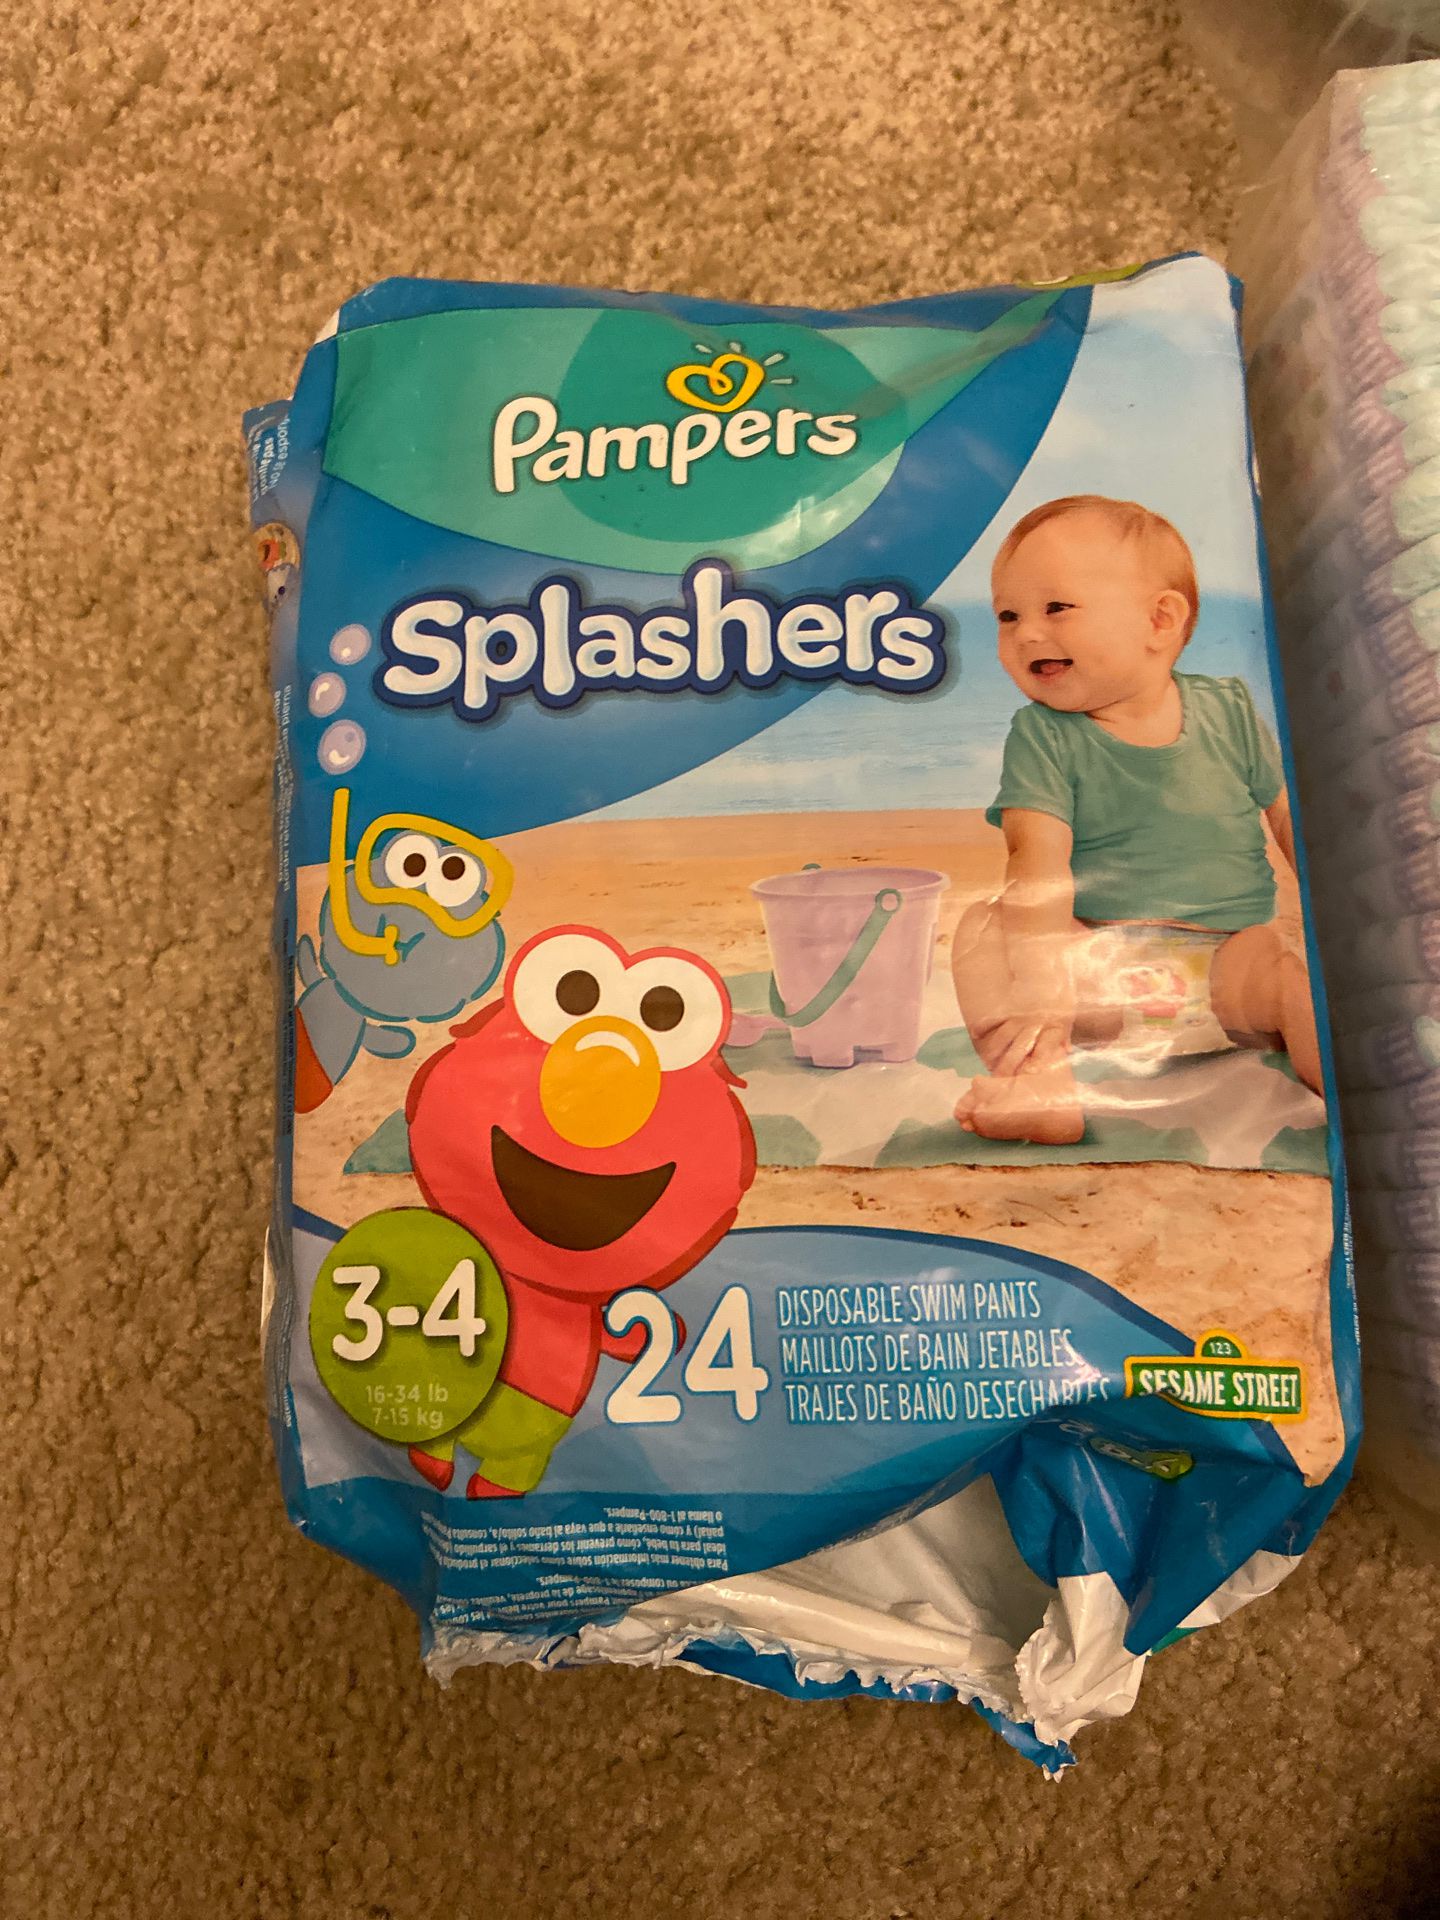 Swimming diapers 17 count 3-4years Pampers